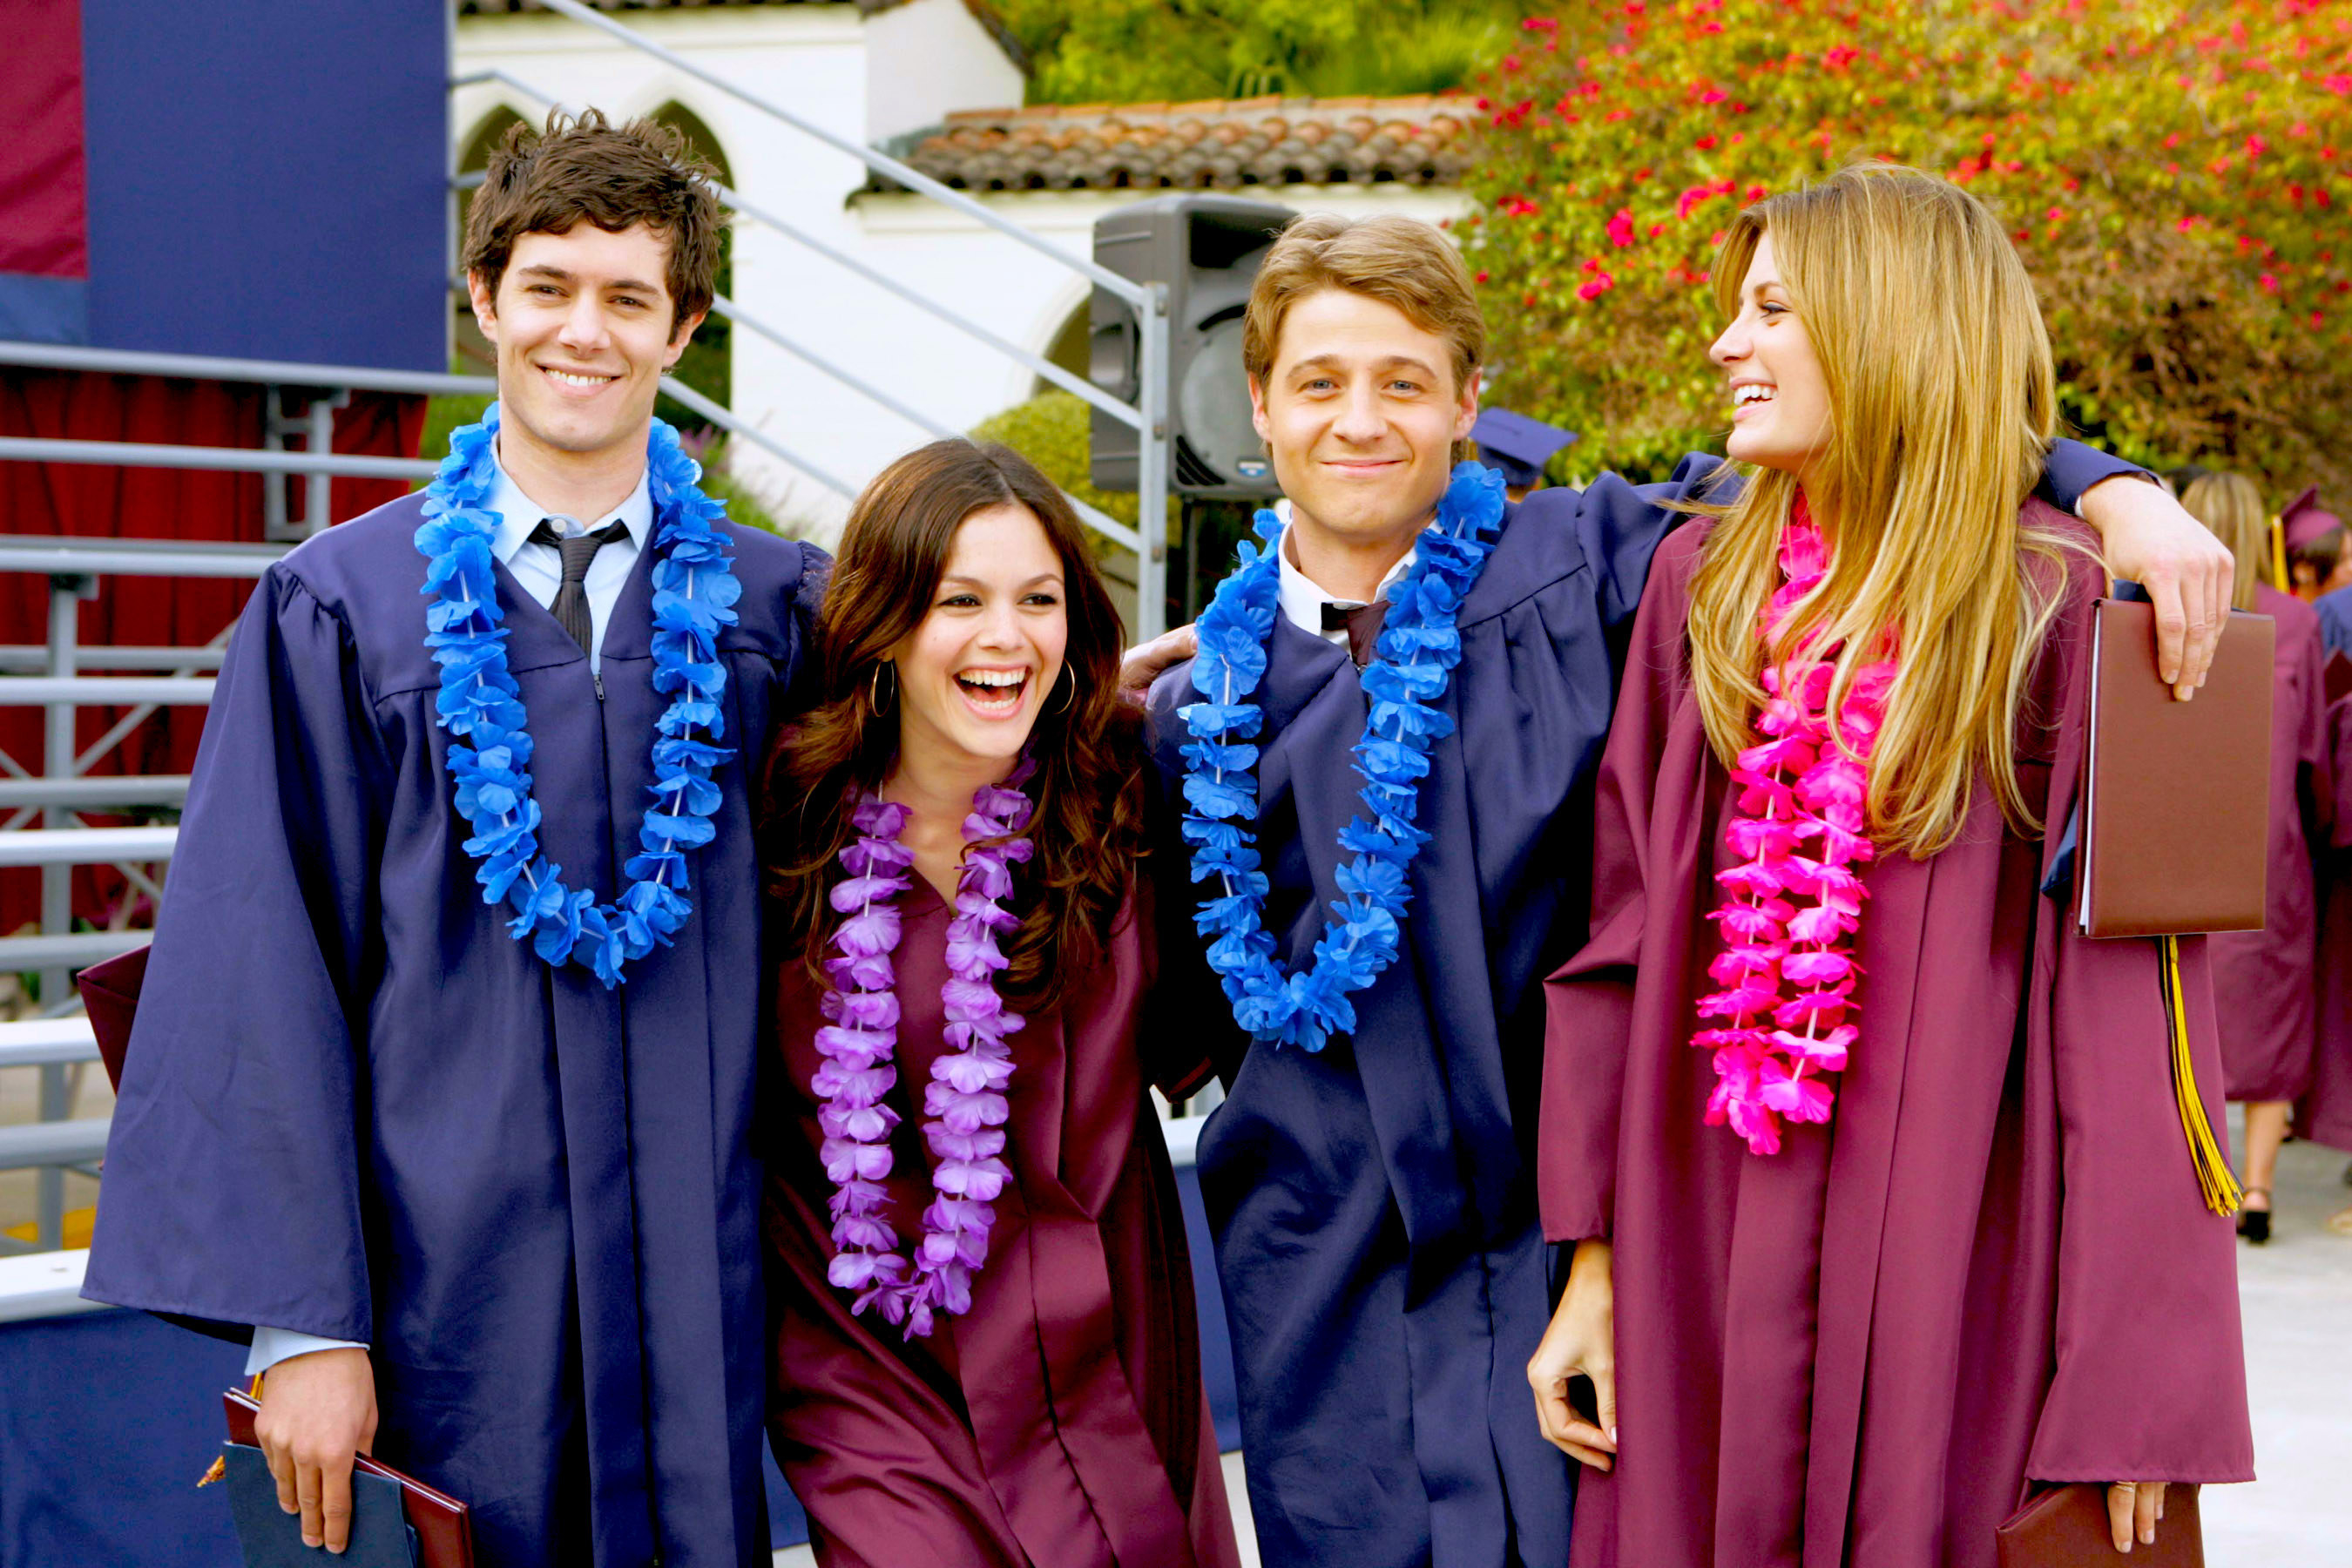 teens from the show The OC in their graduation gowns